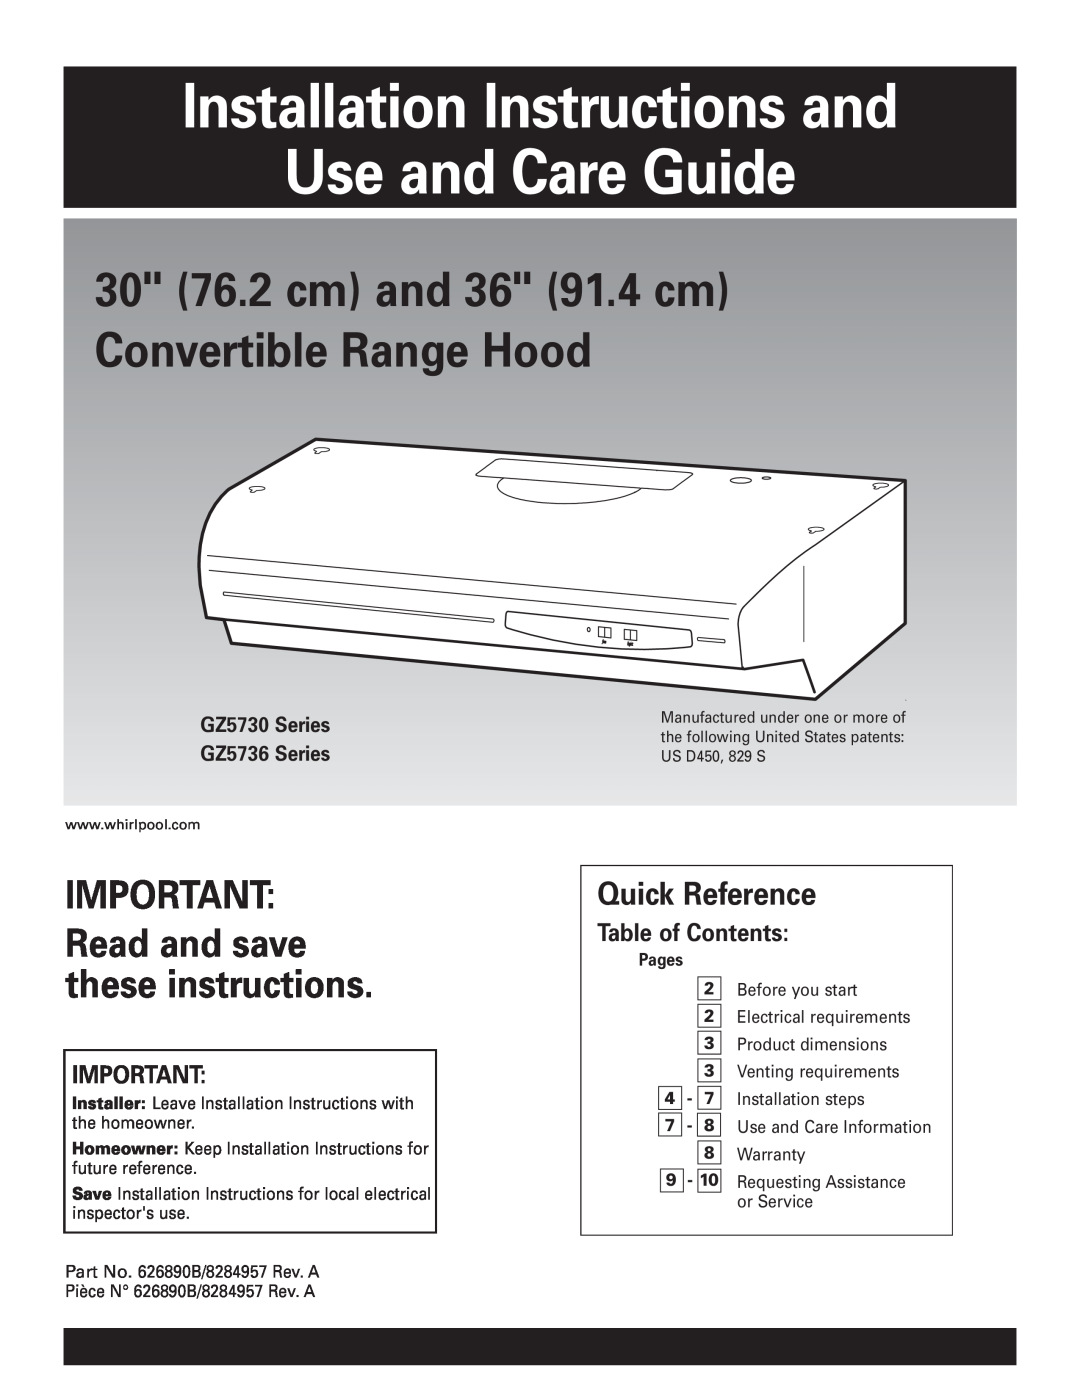 Whirlpool GZ5730, GZ5736 installation instructions 30 76.2 cm and 36 91.4 cm Convertible Range Hood, Quick Reference 